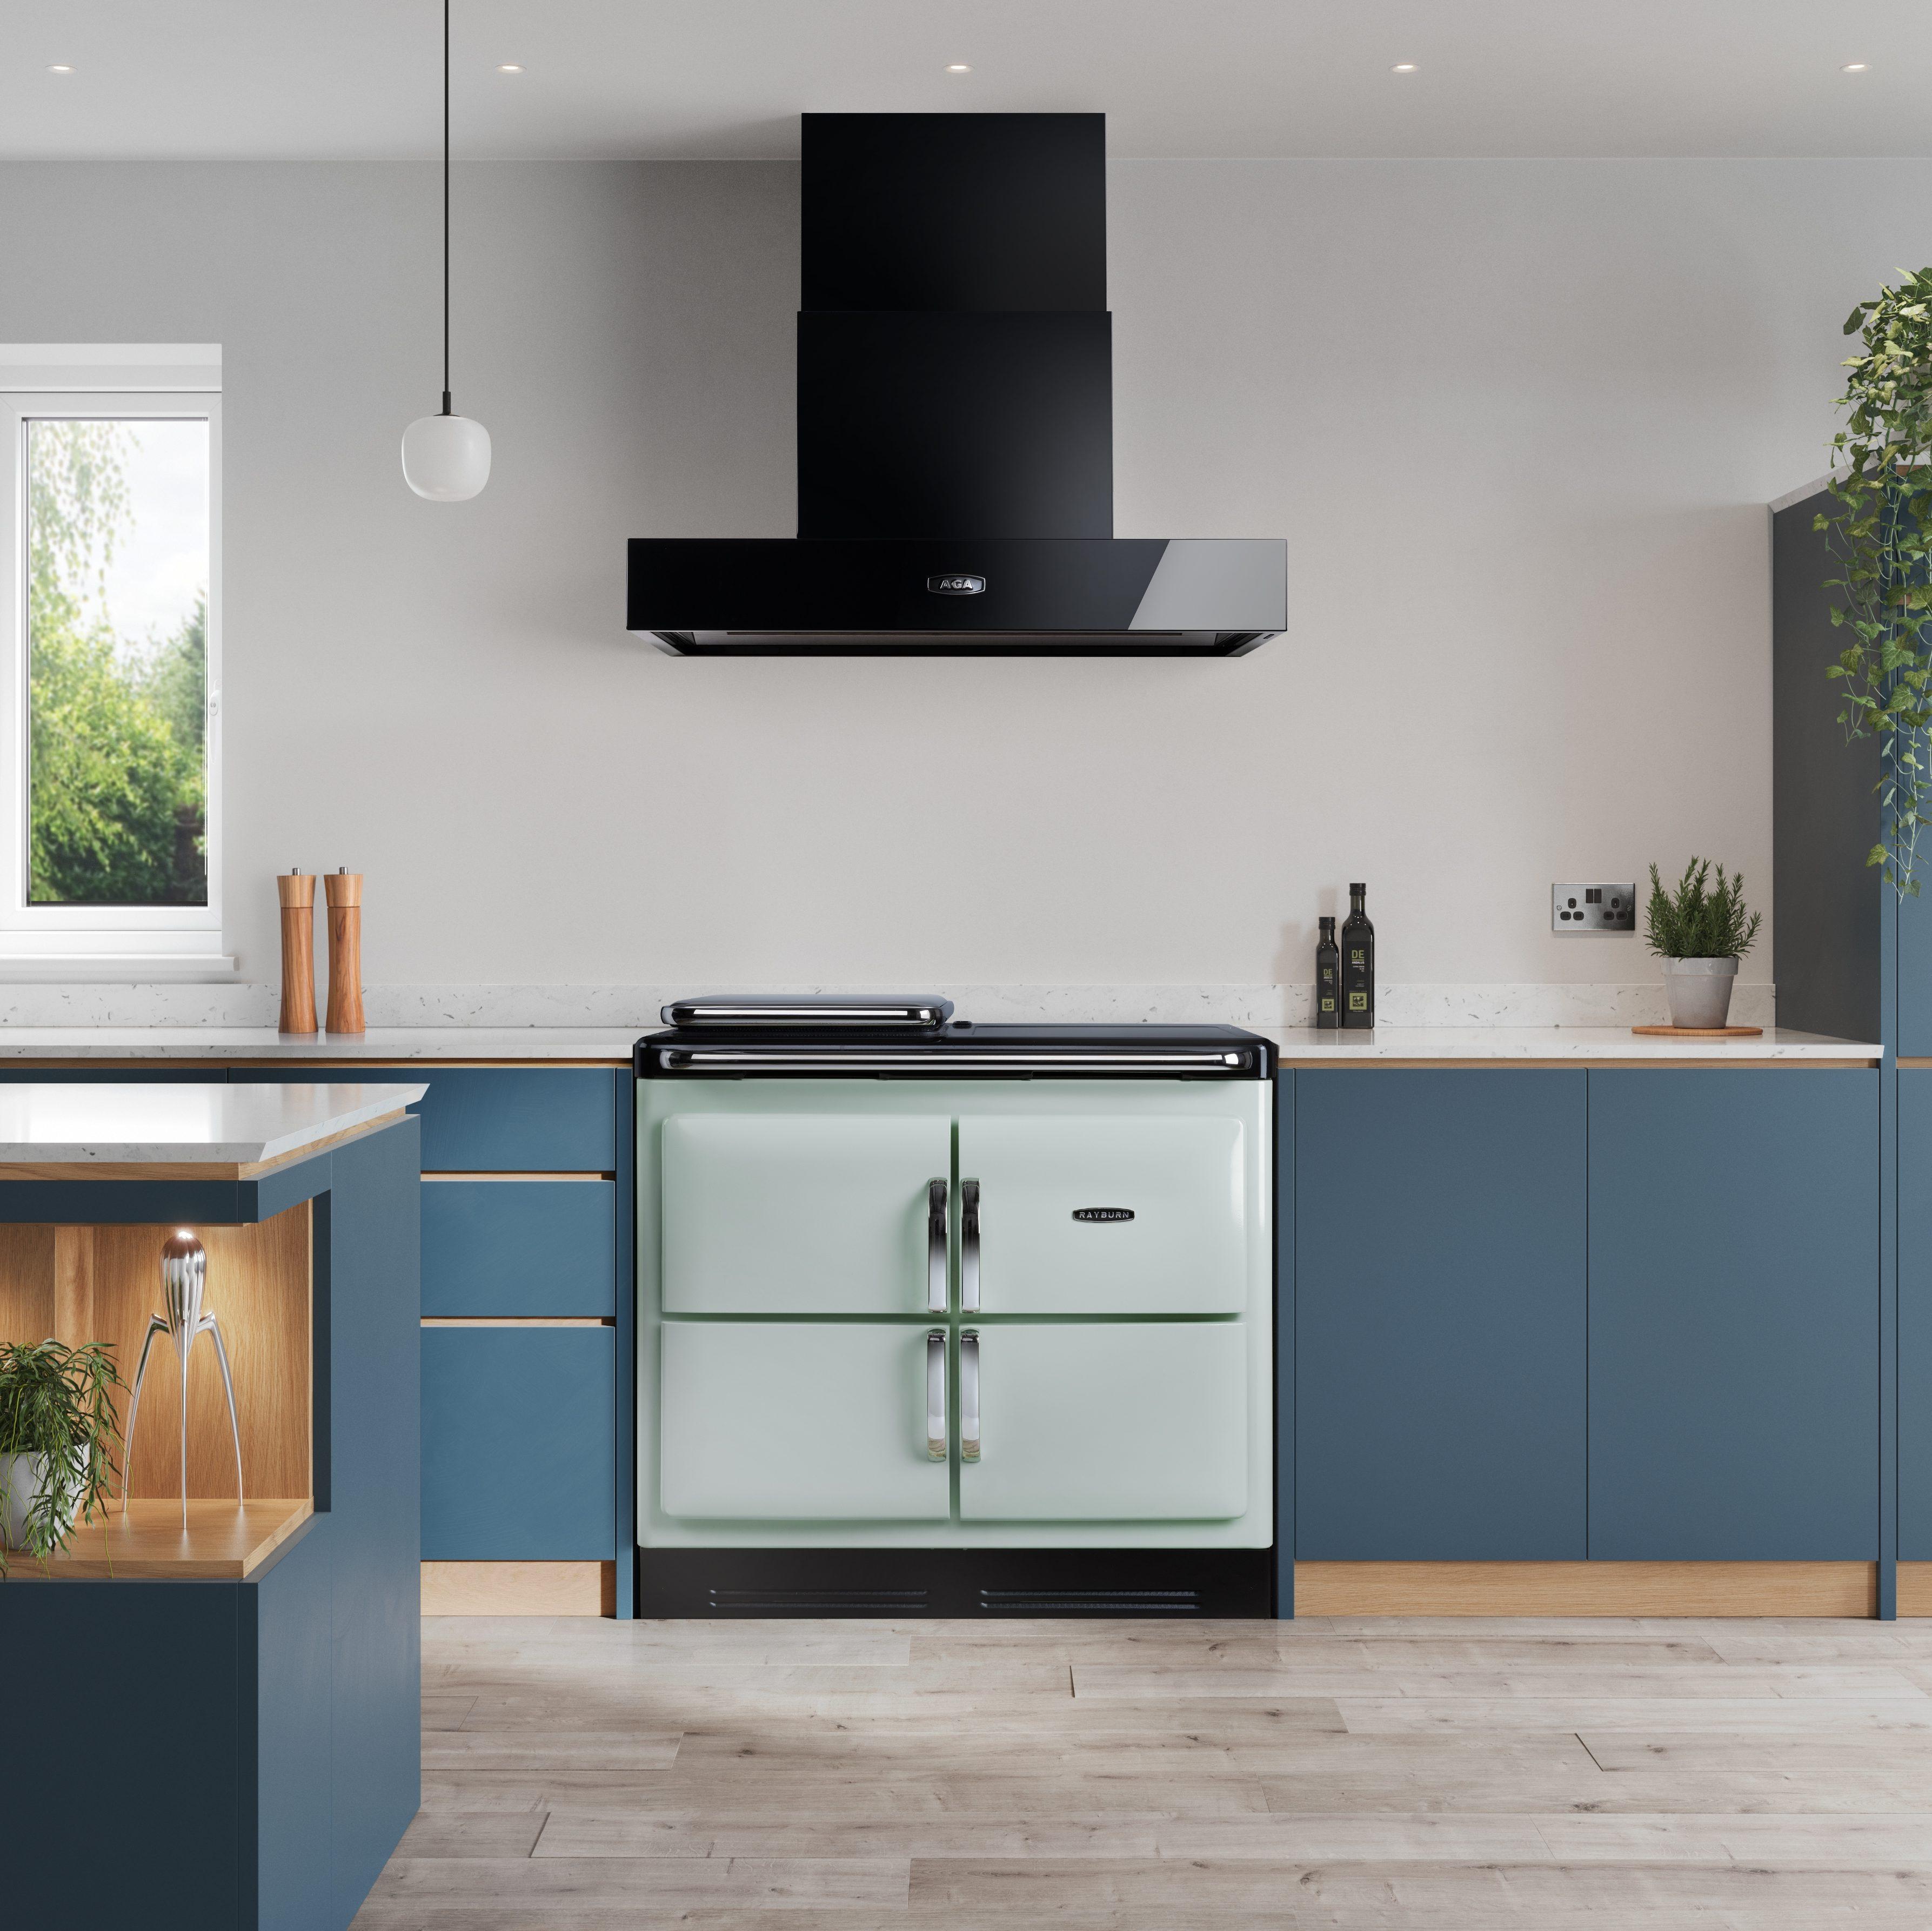 Choosing the Perfect Colours for Your Kitchen: A Guide to Harmonising Cookers, Walls, and Worktops